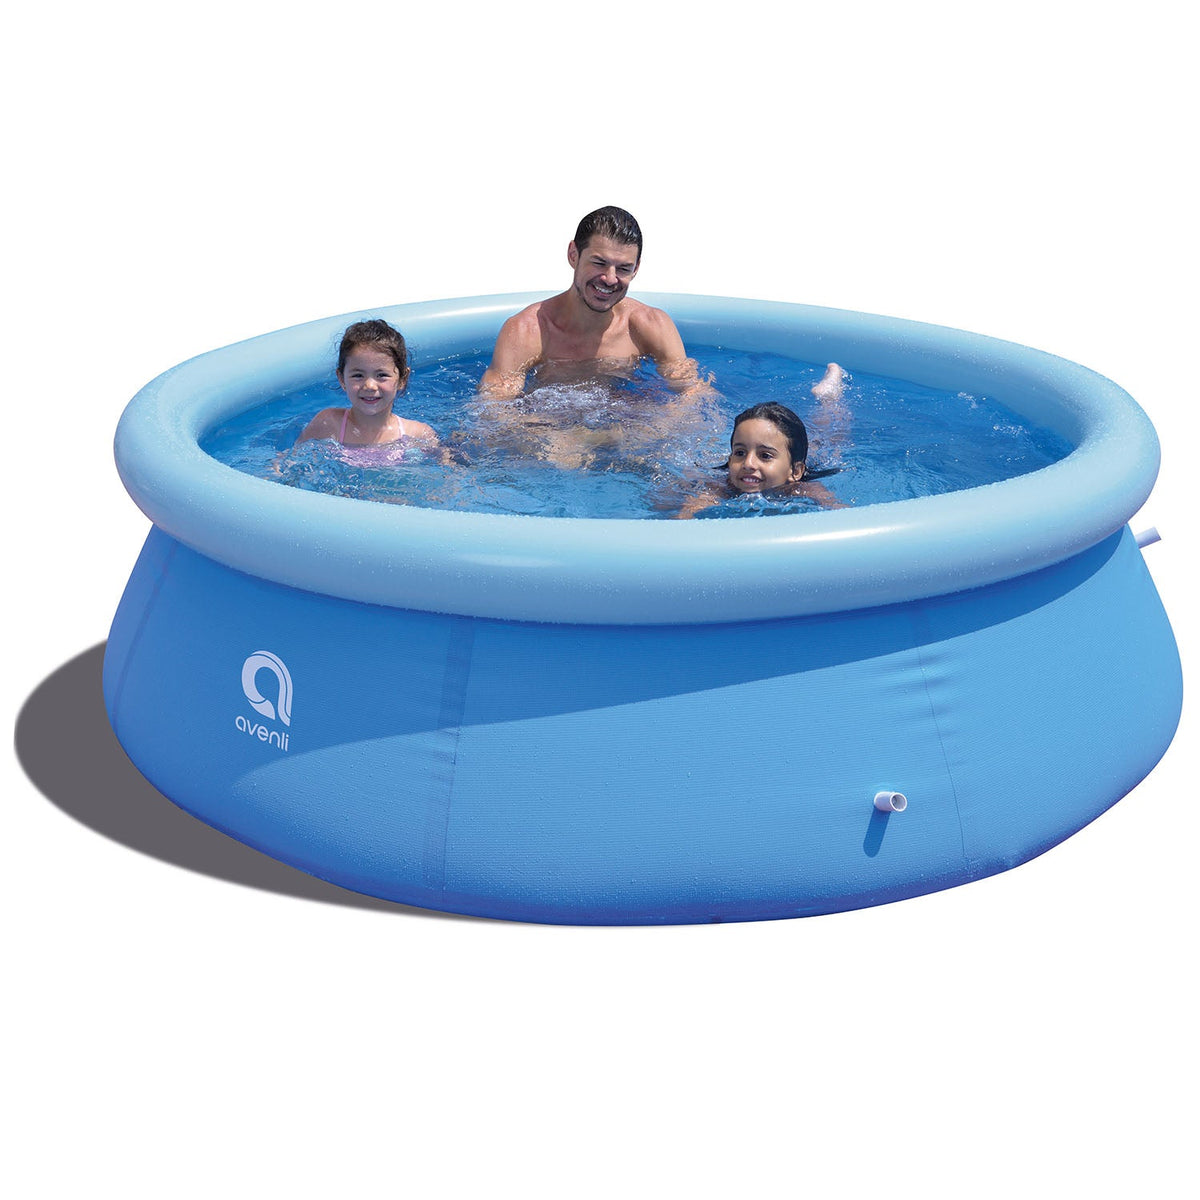 AVENLI Family Inflatable Swimming Pool, portable inflatable swimming pool, backyard swimming pool, easy fill up pool, family pool, AVENLI pool, backyard pool party, family inflatable swimming pool